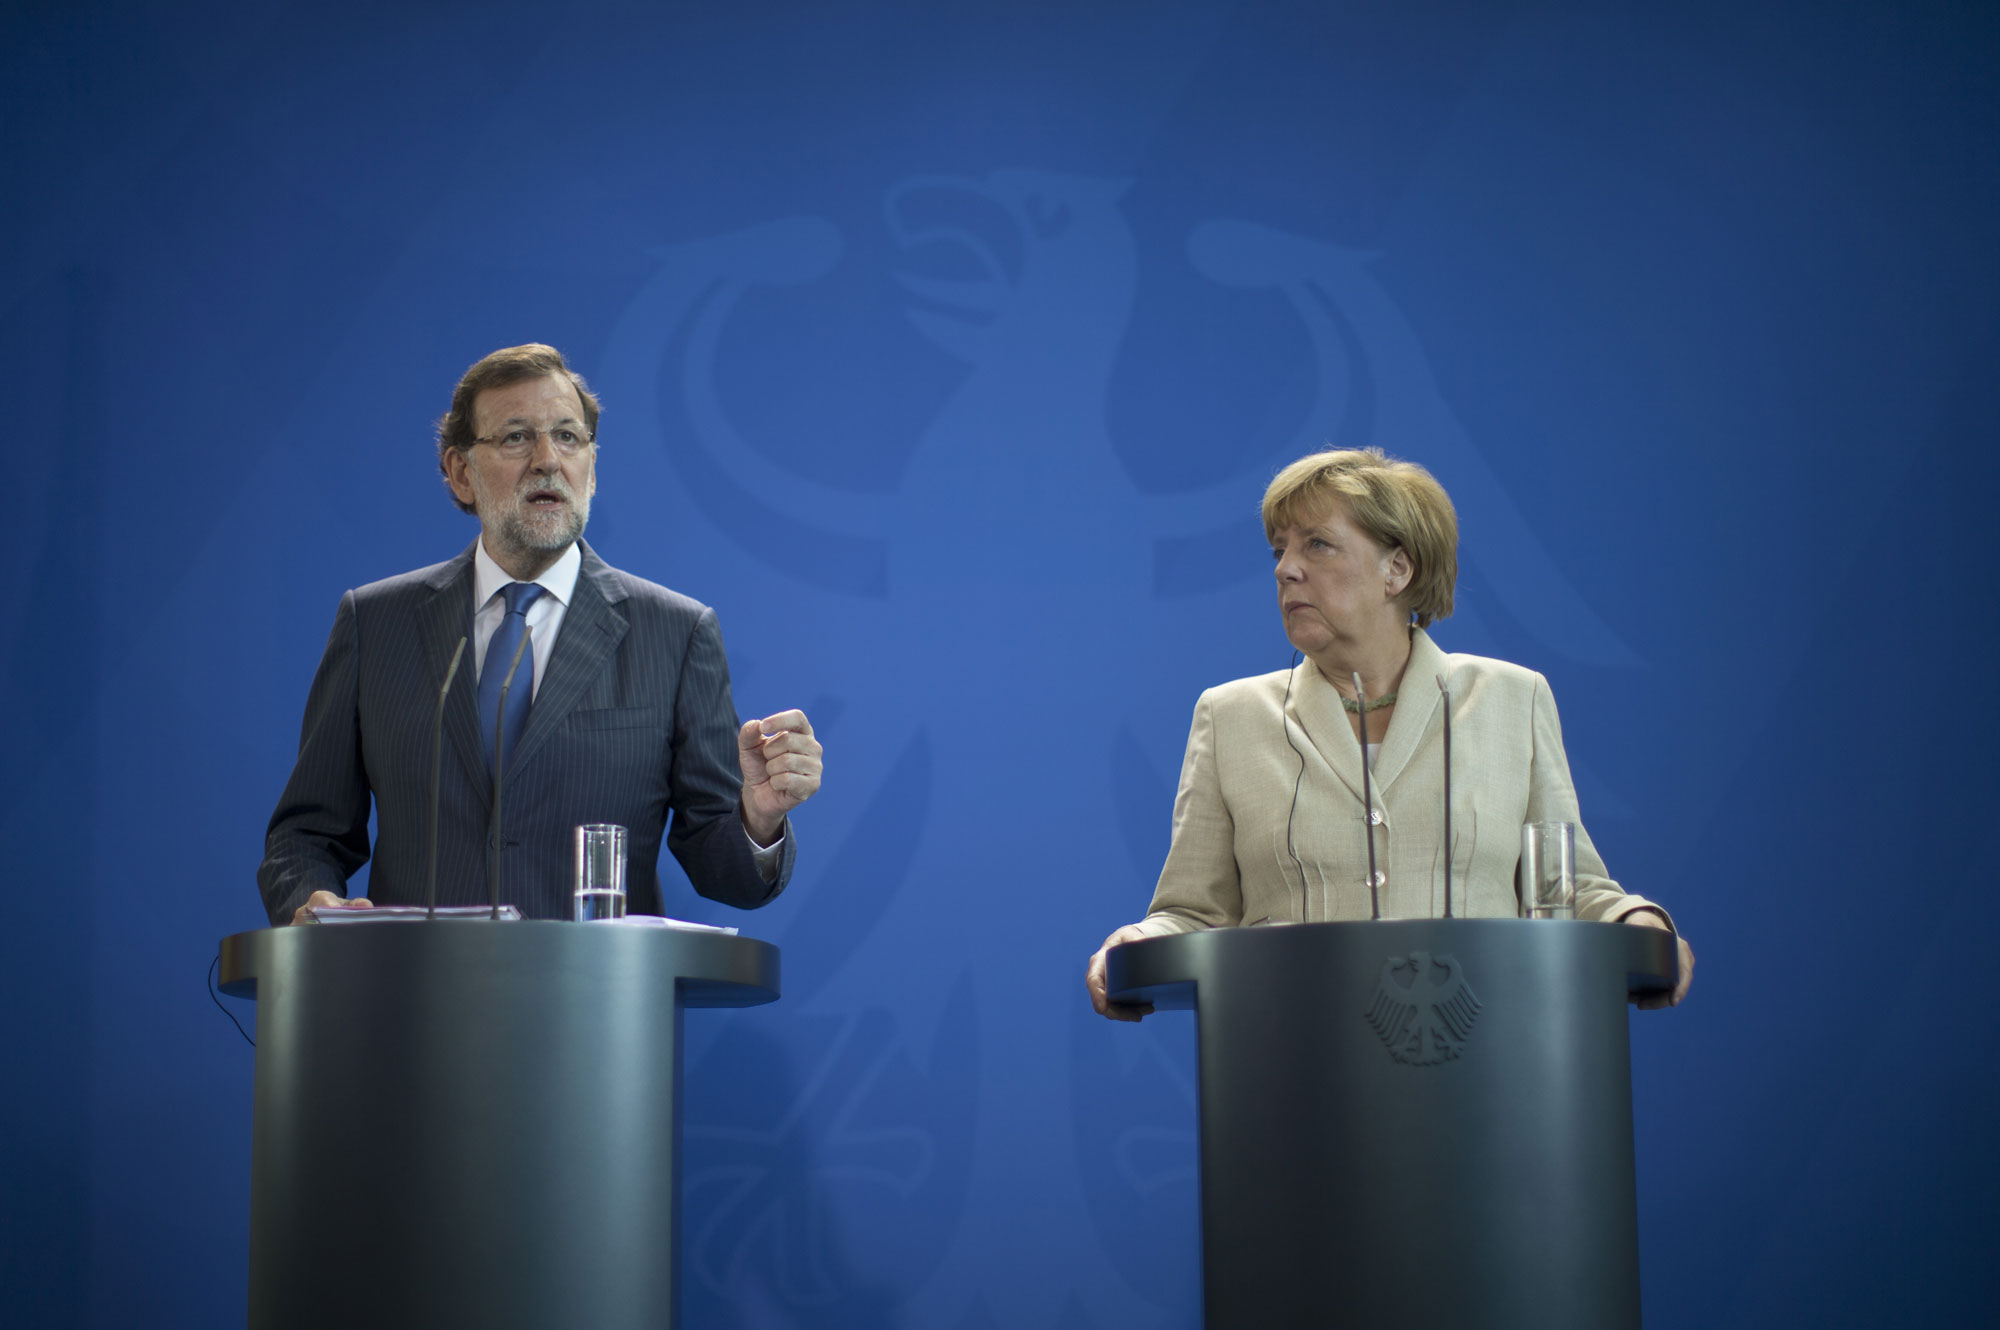 Spanish President Mariano Rajoy and German Chancellor Angela Merkel during their bilateral summit on Tuesday